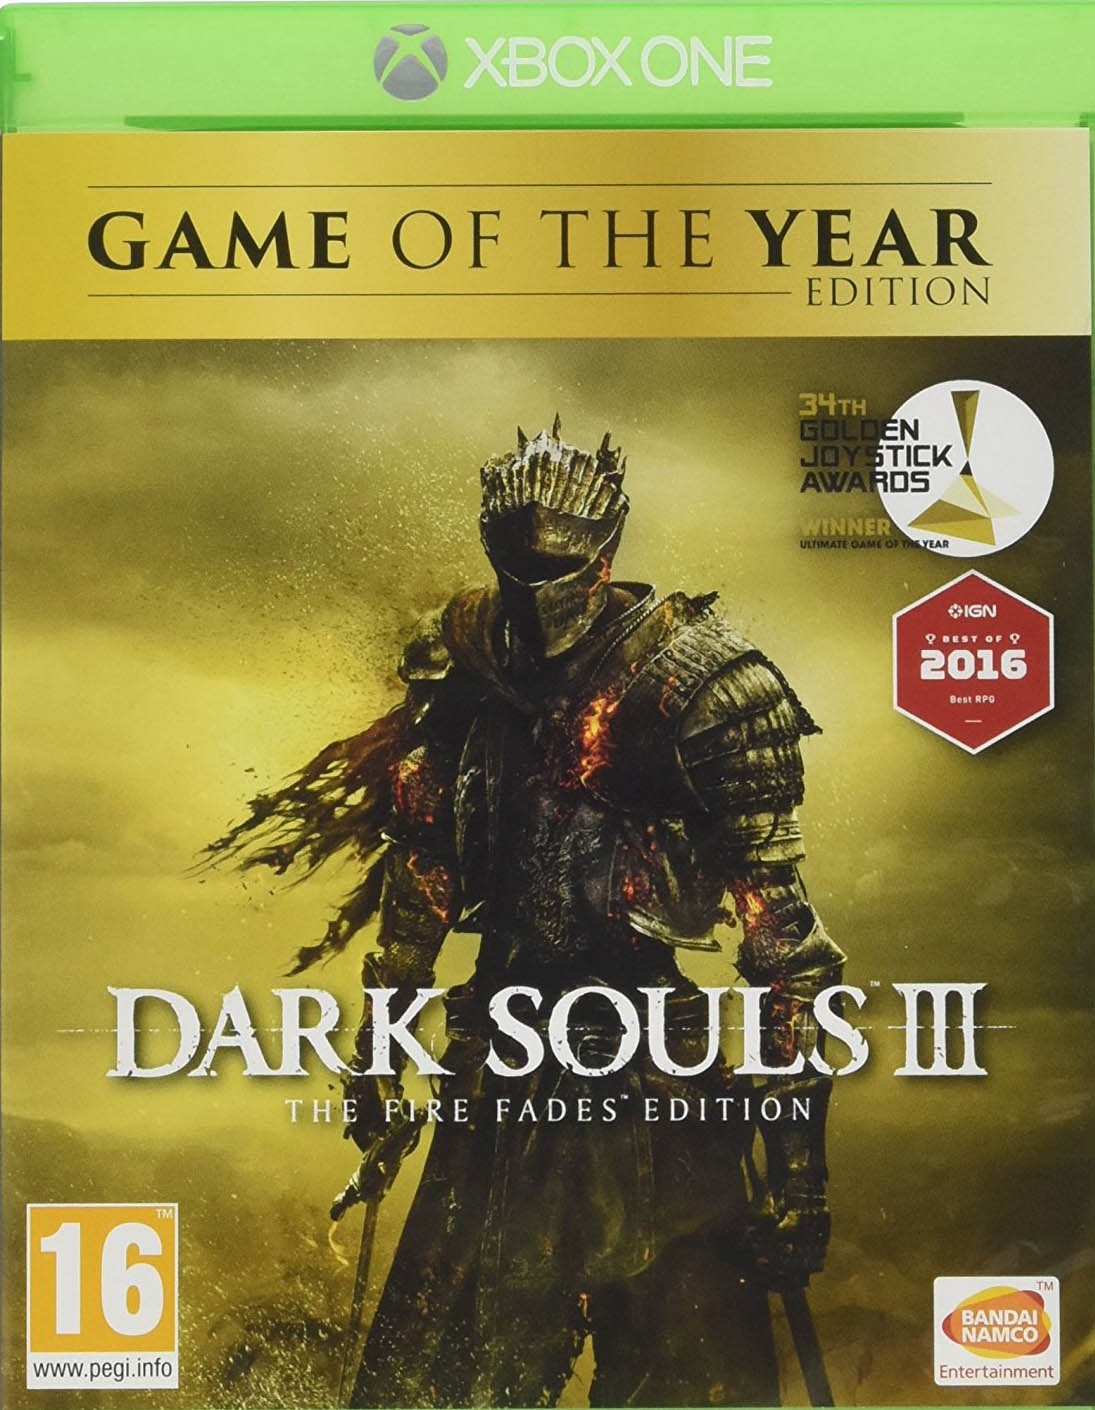 Dark Souls III: The Fire Fades Edition (Game of the Year Edition) Xbox One издание в Европе